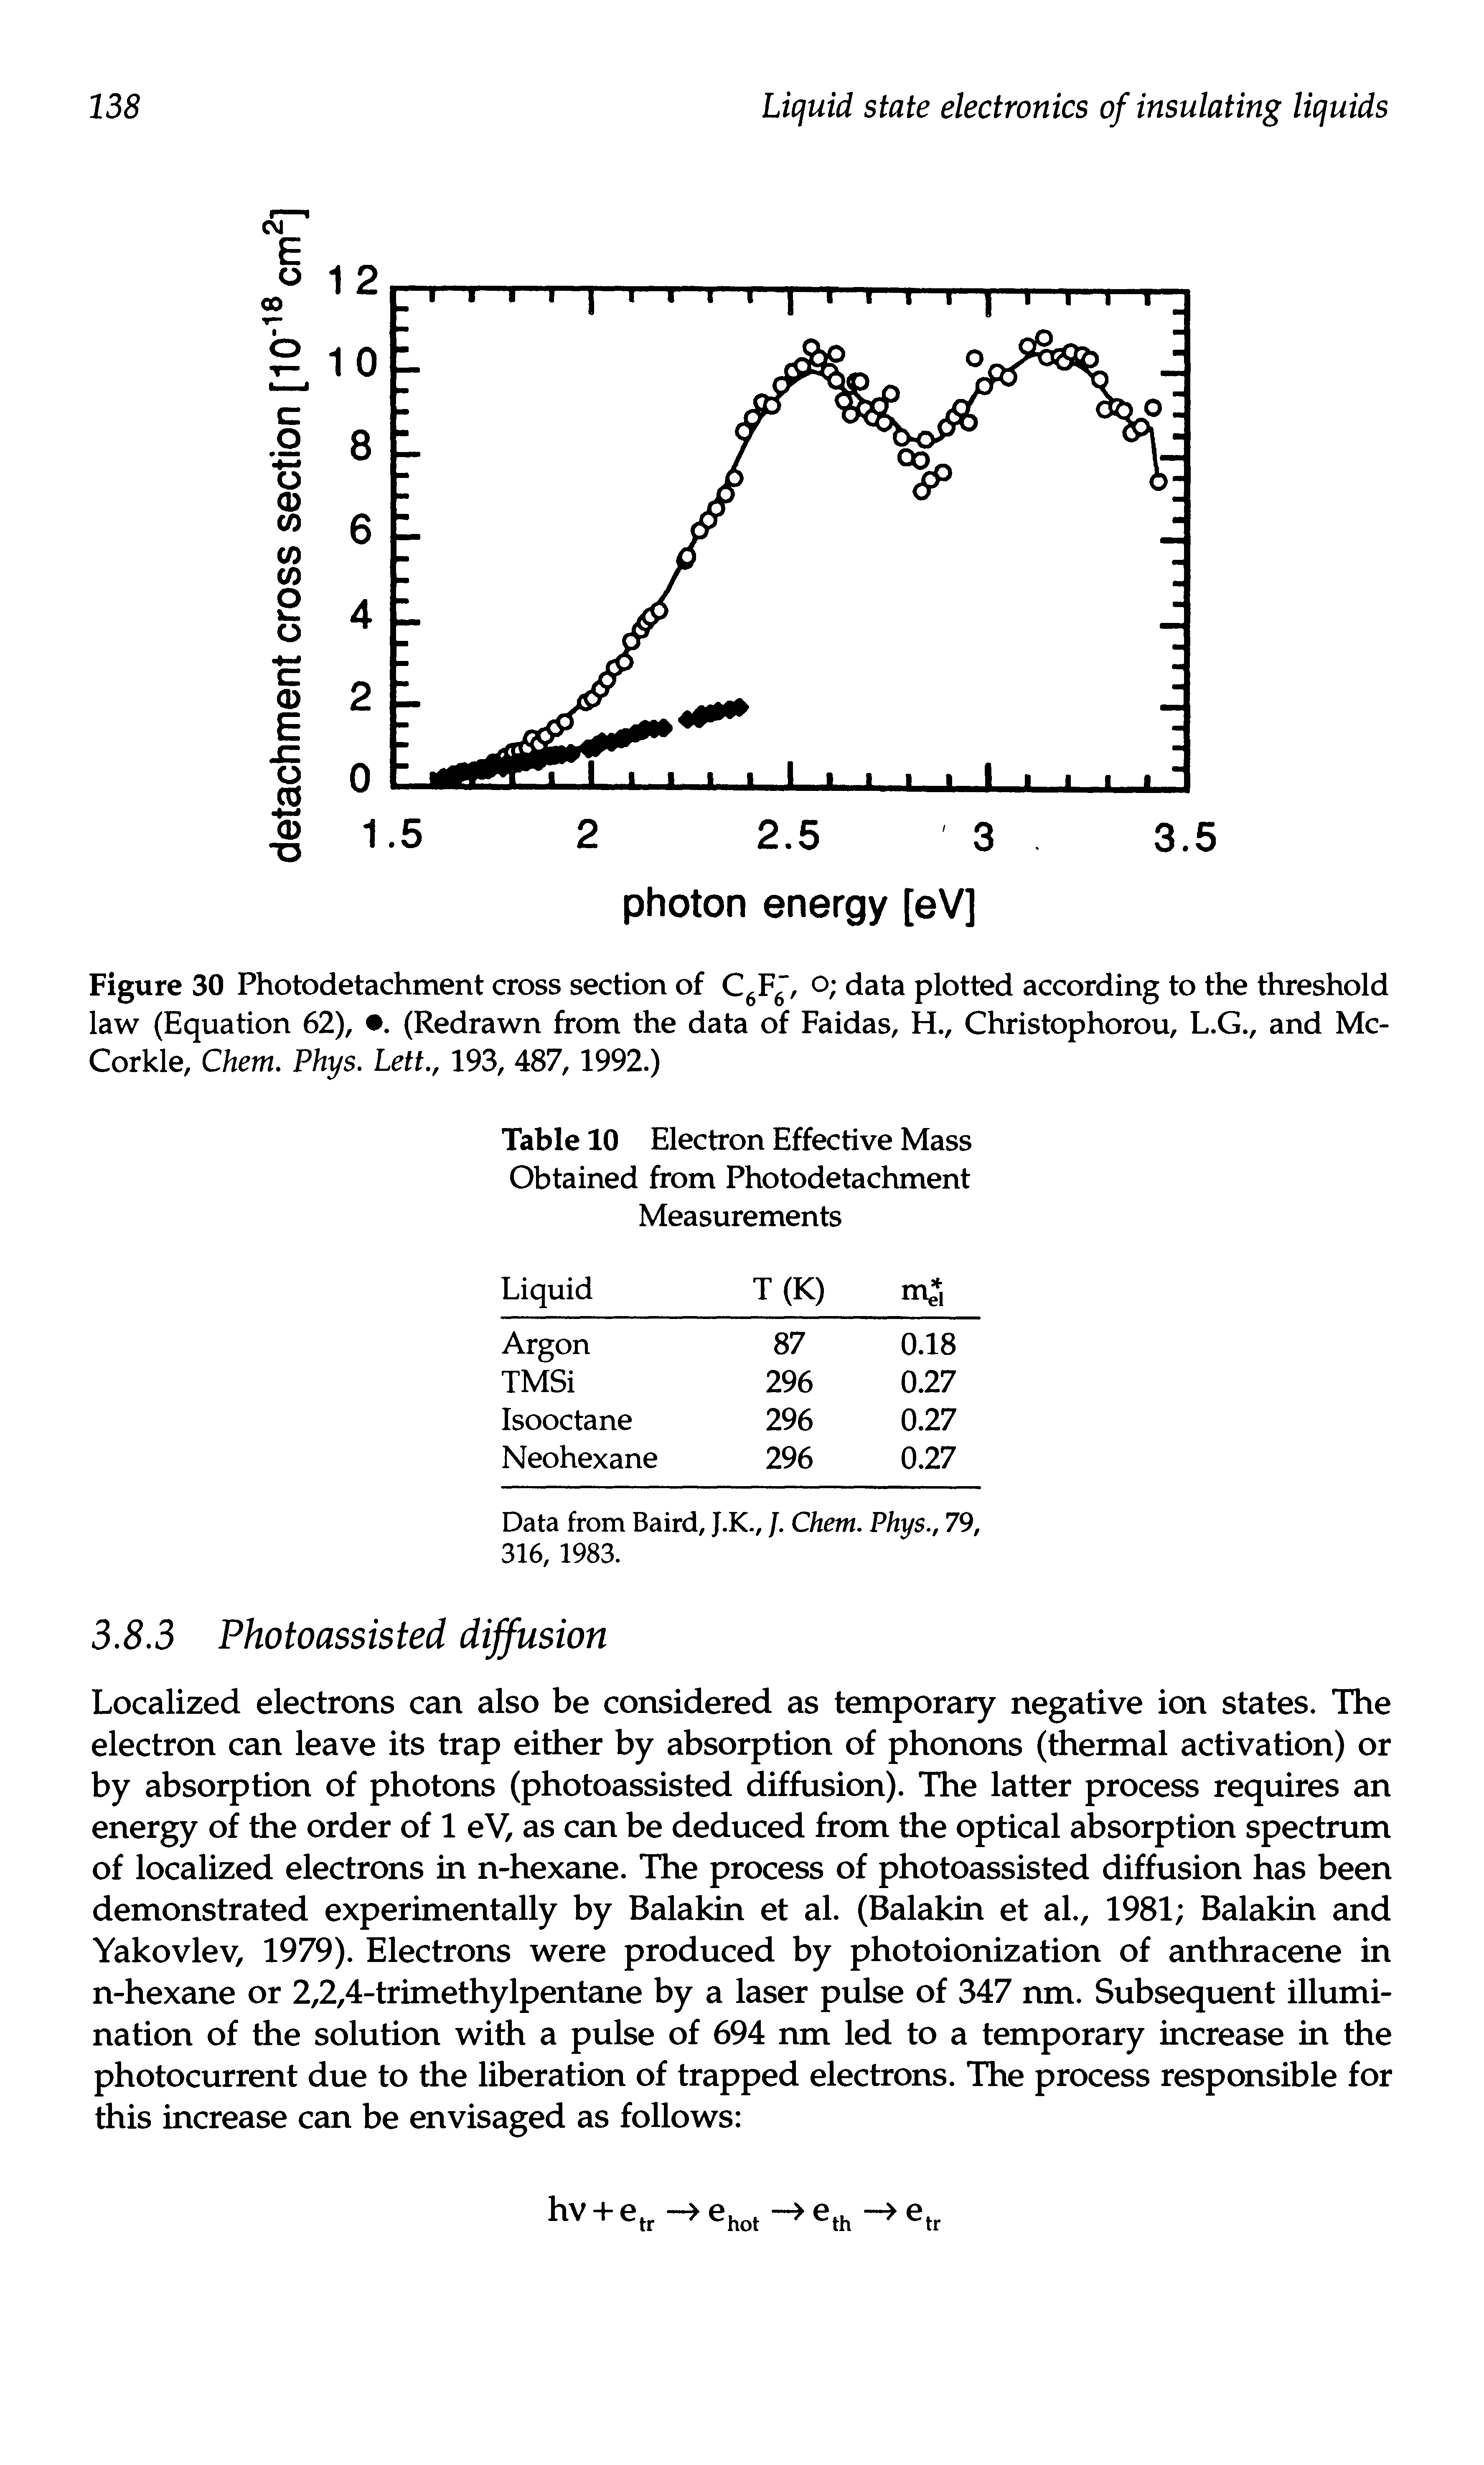 Figure 30 Photodetachment cross section of C F", O data plotted according to the threshold law (Equation 62), . (Redrawn from the data of Faidas, H., Christophorou, L.G., and Mc-Corkle, Chem. Phys. Lett., 193, 487,1992.)...